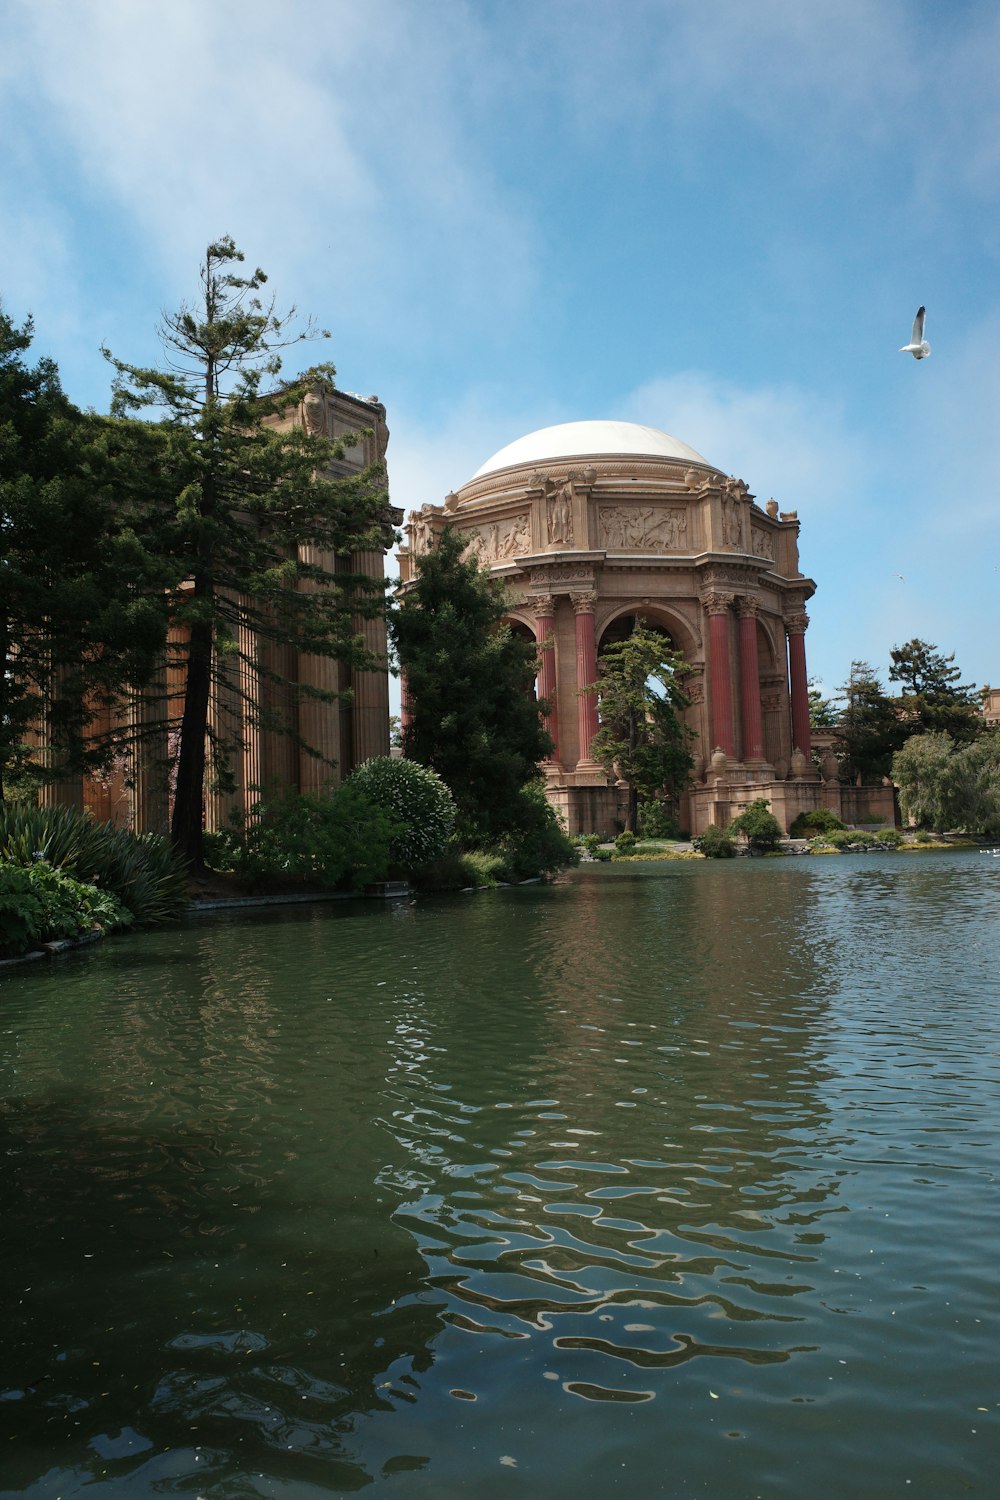 Palace of Fine Arts with pillars and a body of water in front of it